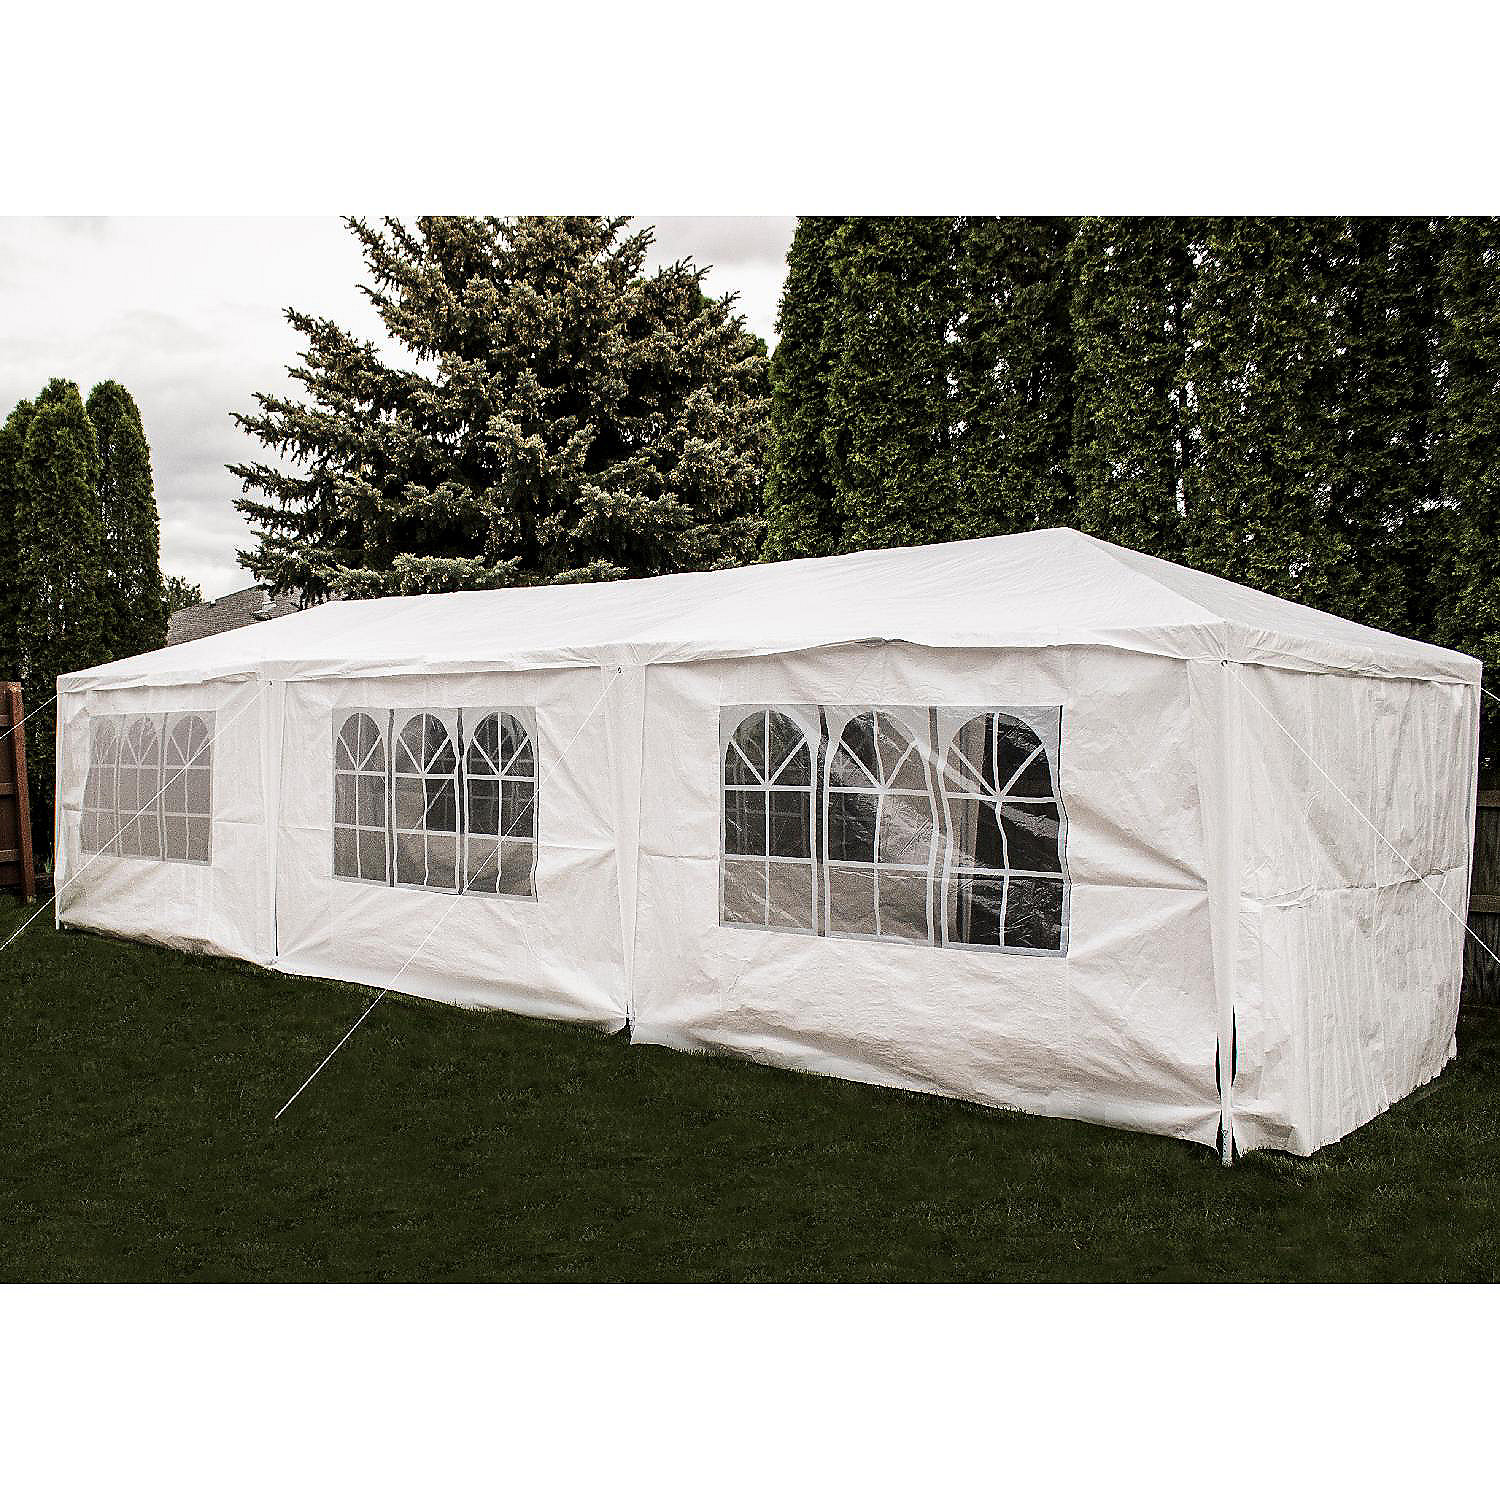 Punt Vervagen leugenaar Backyard Expressions Party Tent Canopy Tent for Outdoor Wedding Party or  Camping BBQ w/ Removable Waterproof Sidewalls - 30' x 10' | Oriental Trading